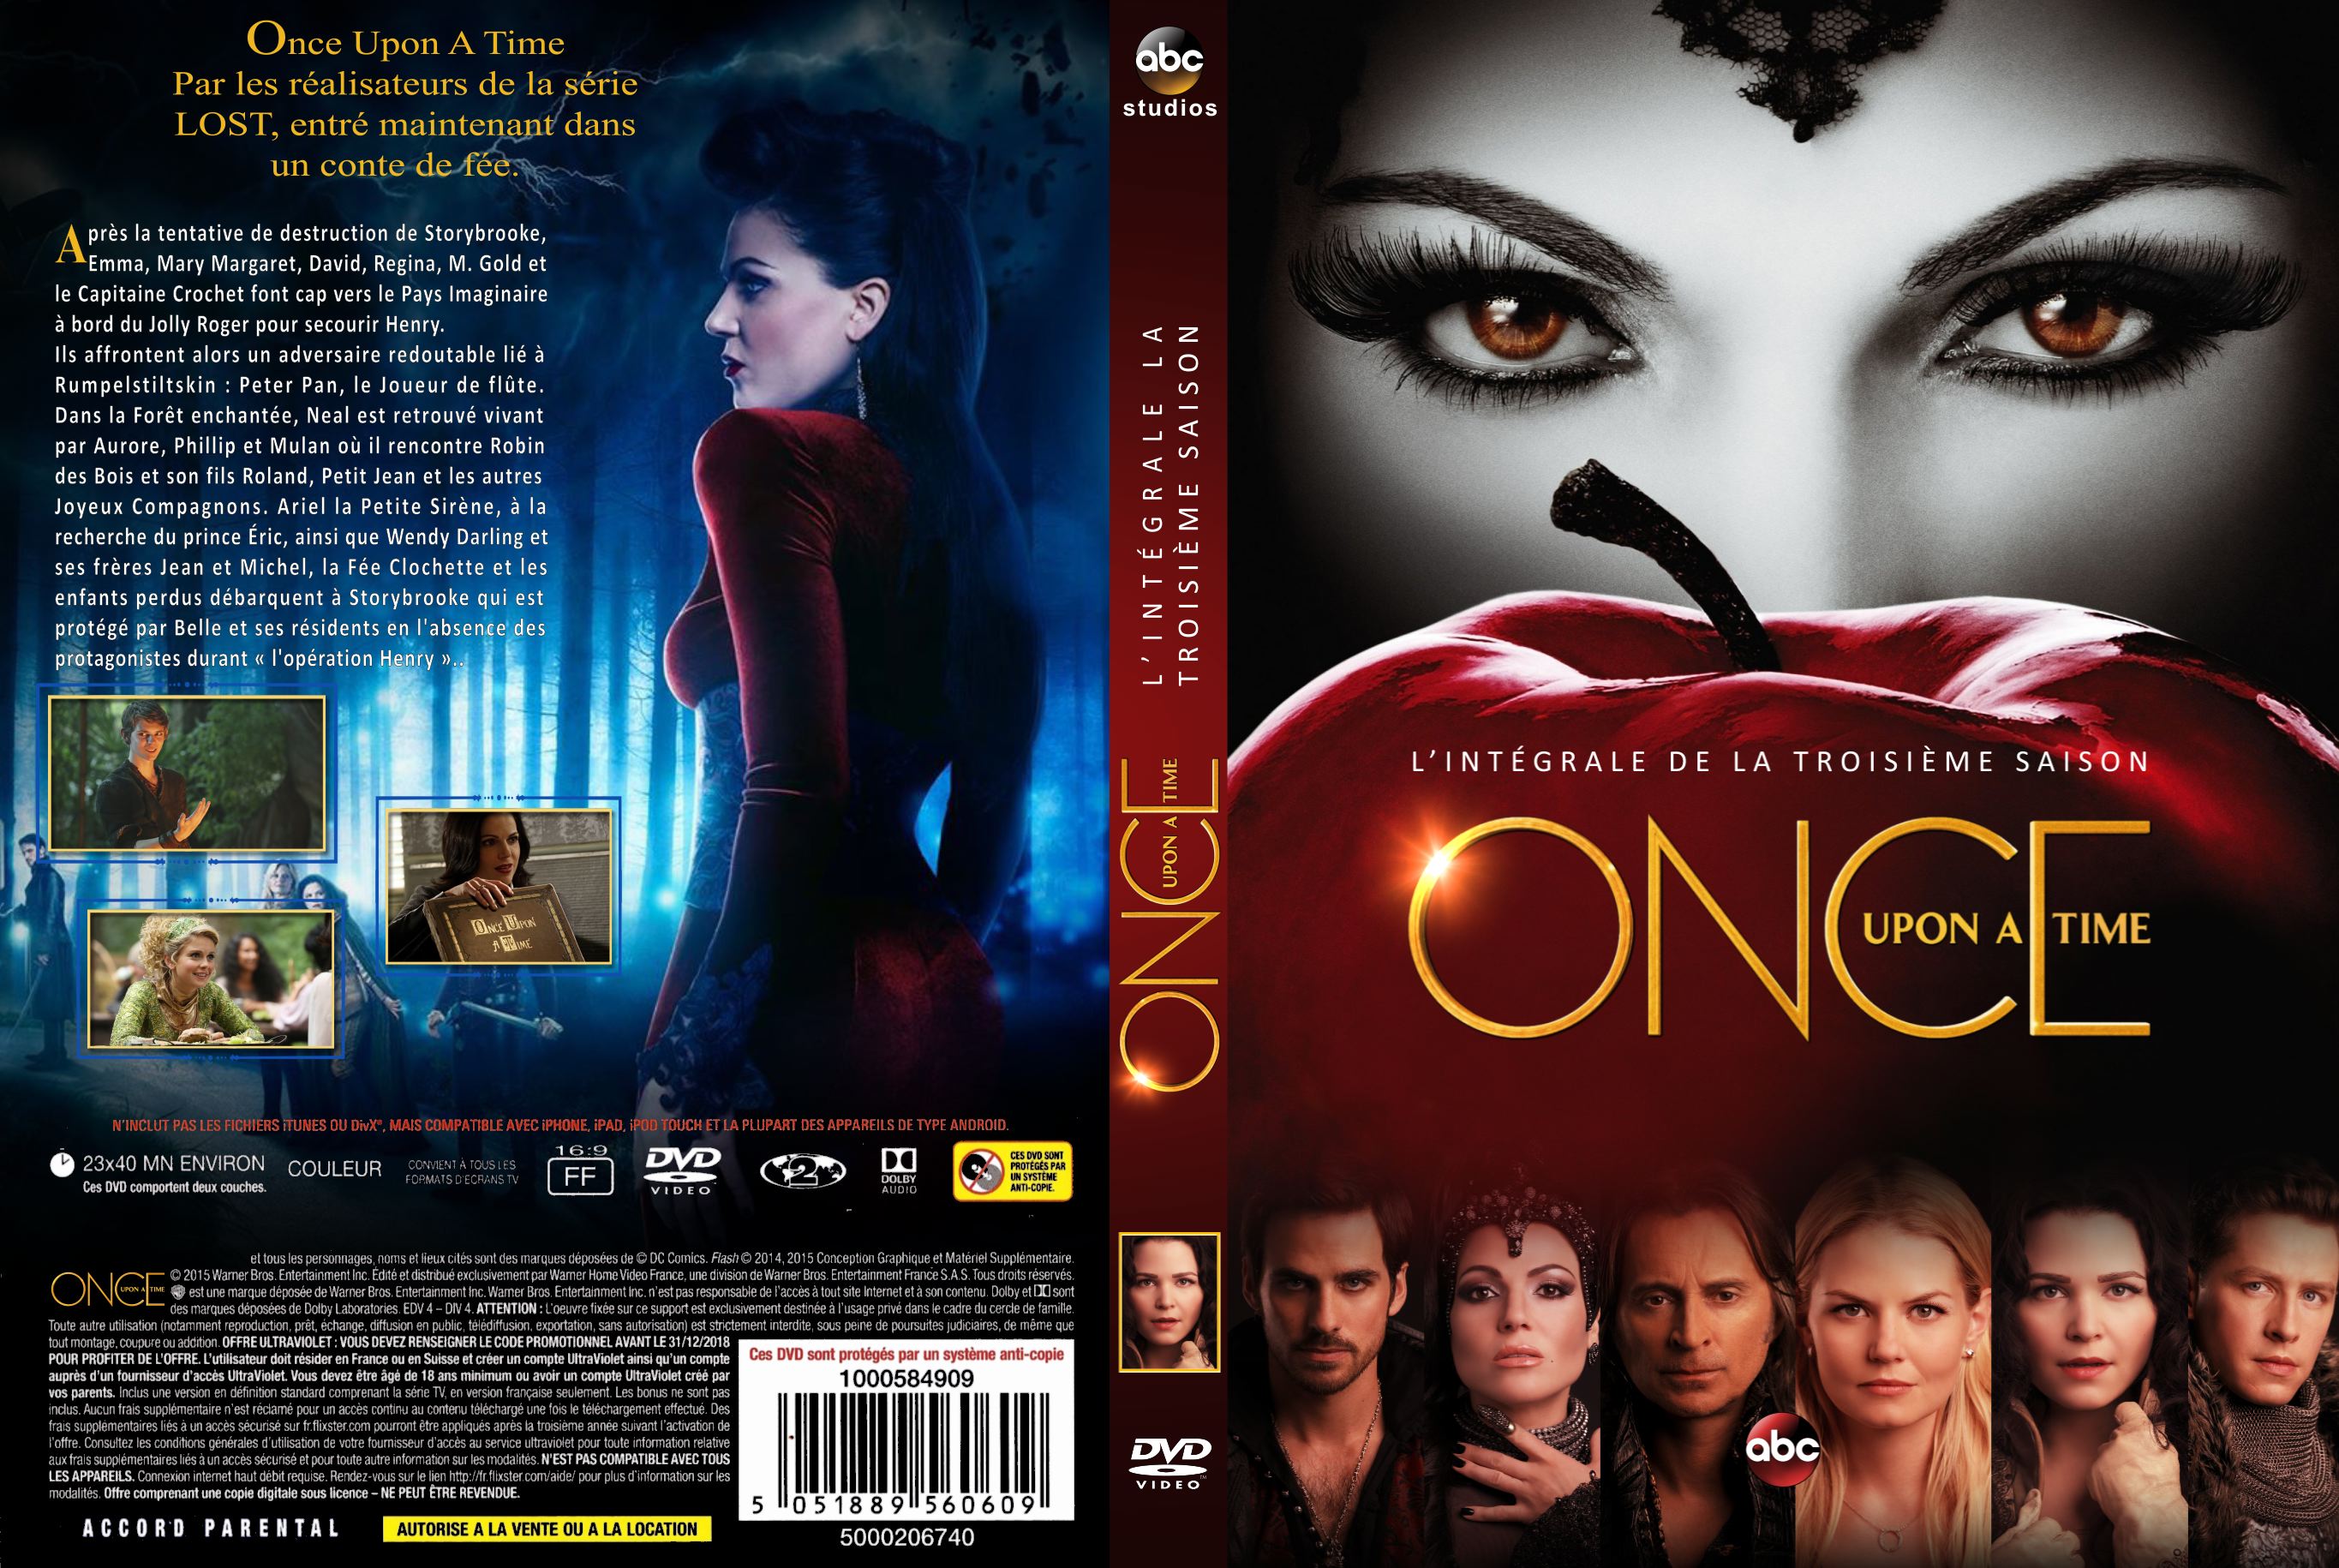 Jaquette DVD Once Upon a Time saison 3 custom